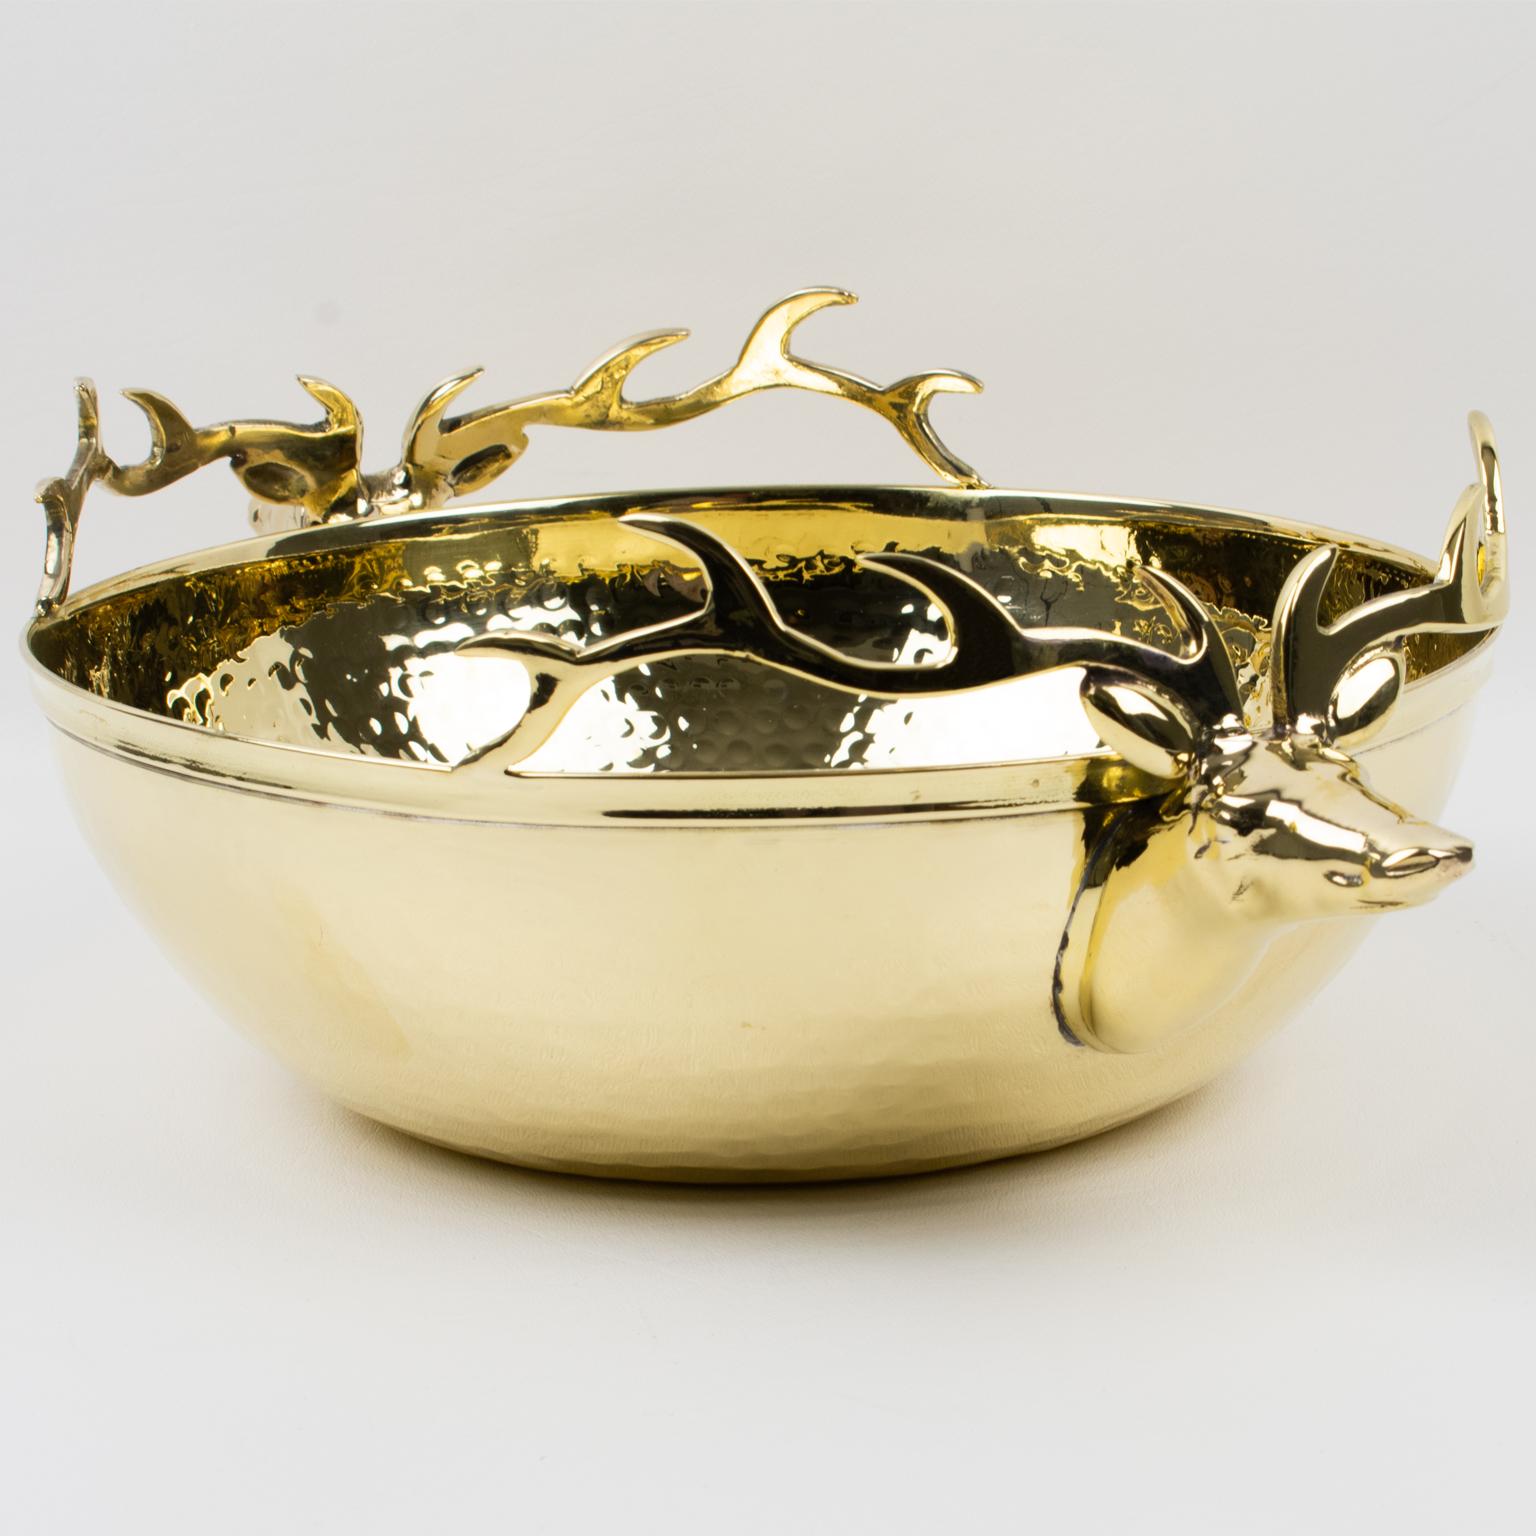 Brass Bowl Decorative Centerpiece with Stag Heads Handles, Italy 1980s In Good Condition For Sale In Atlanta, GA